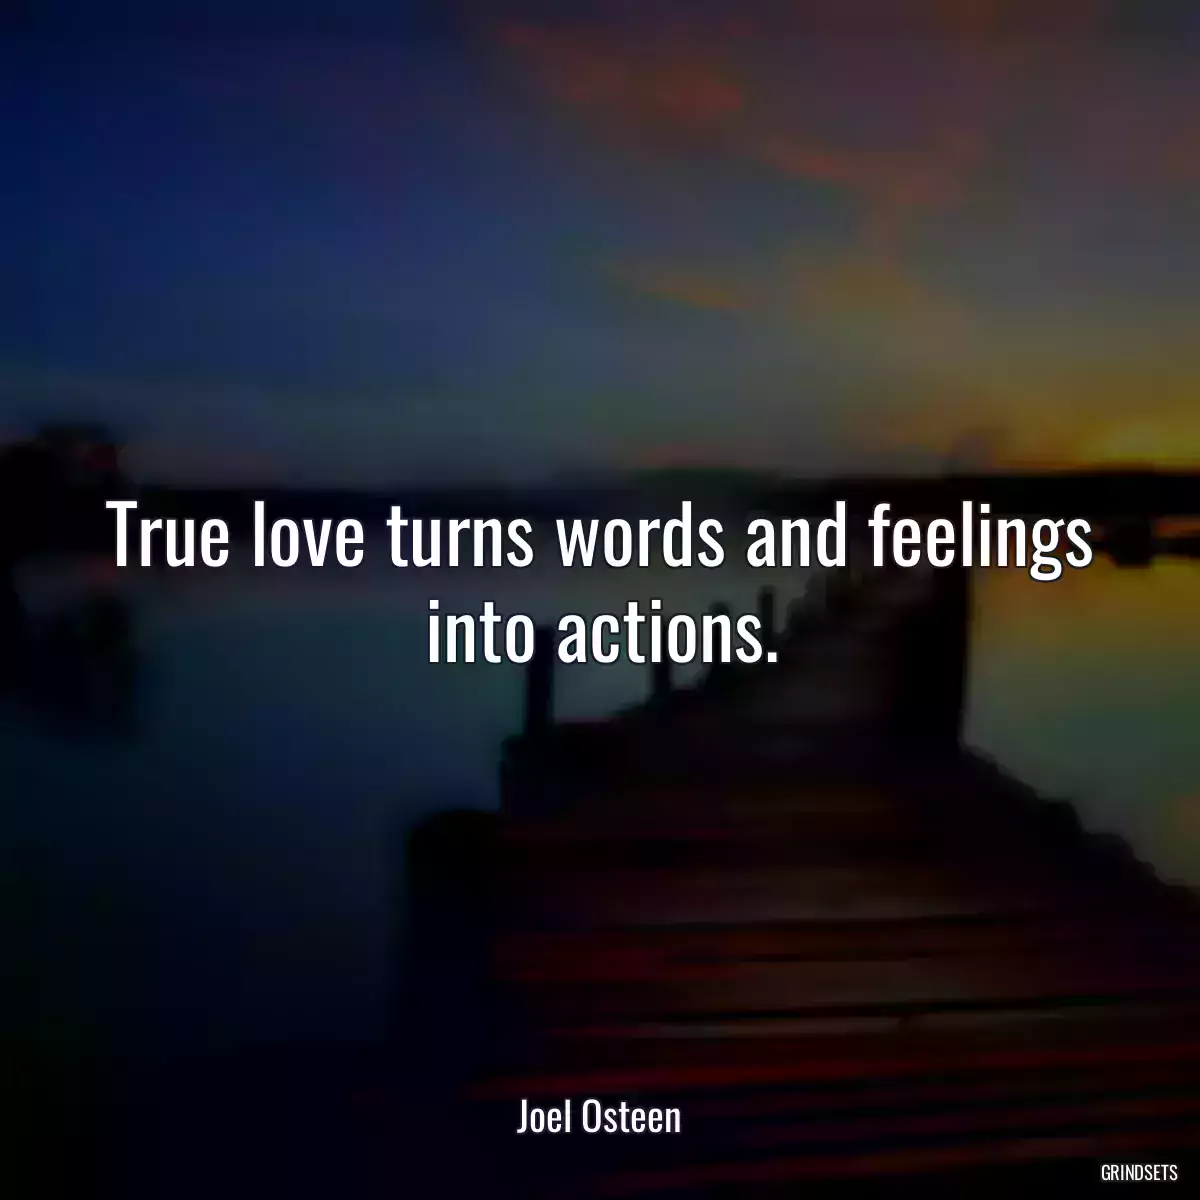 True love turns words and feelings into actions.